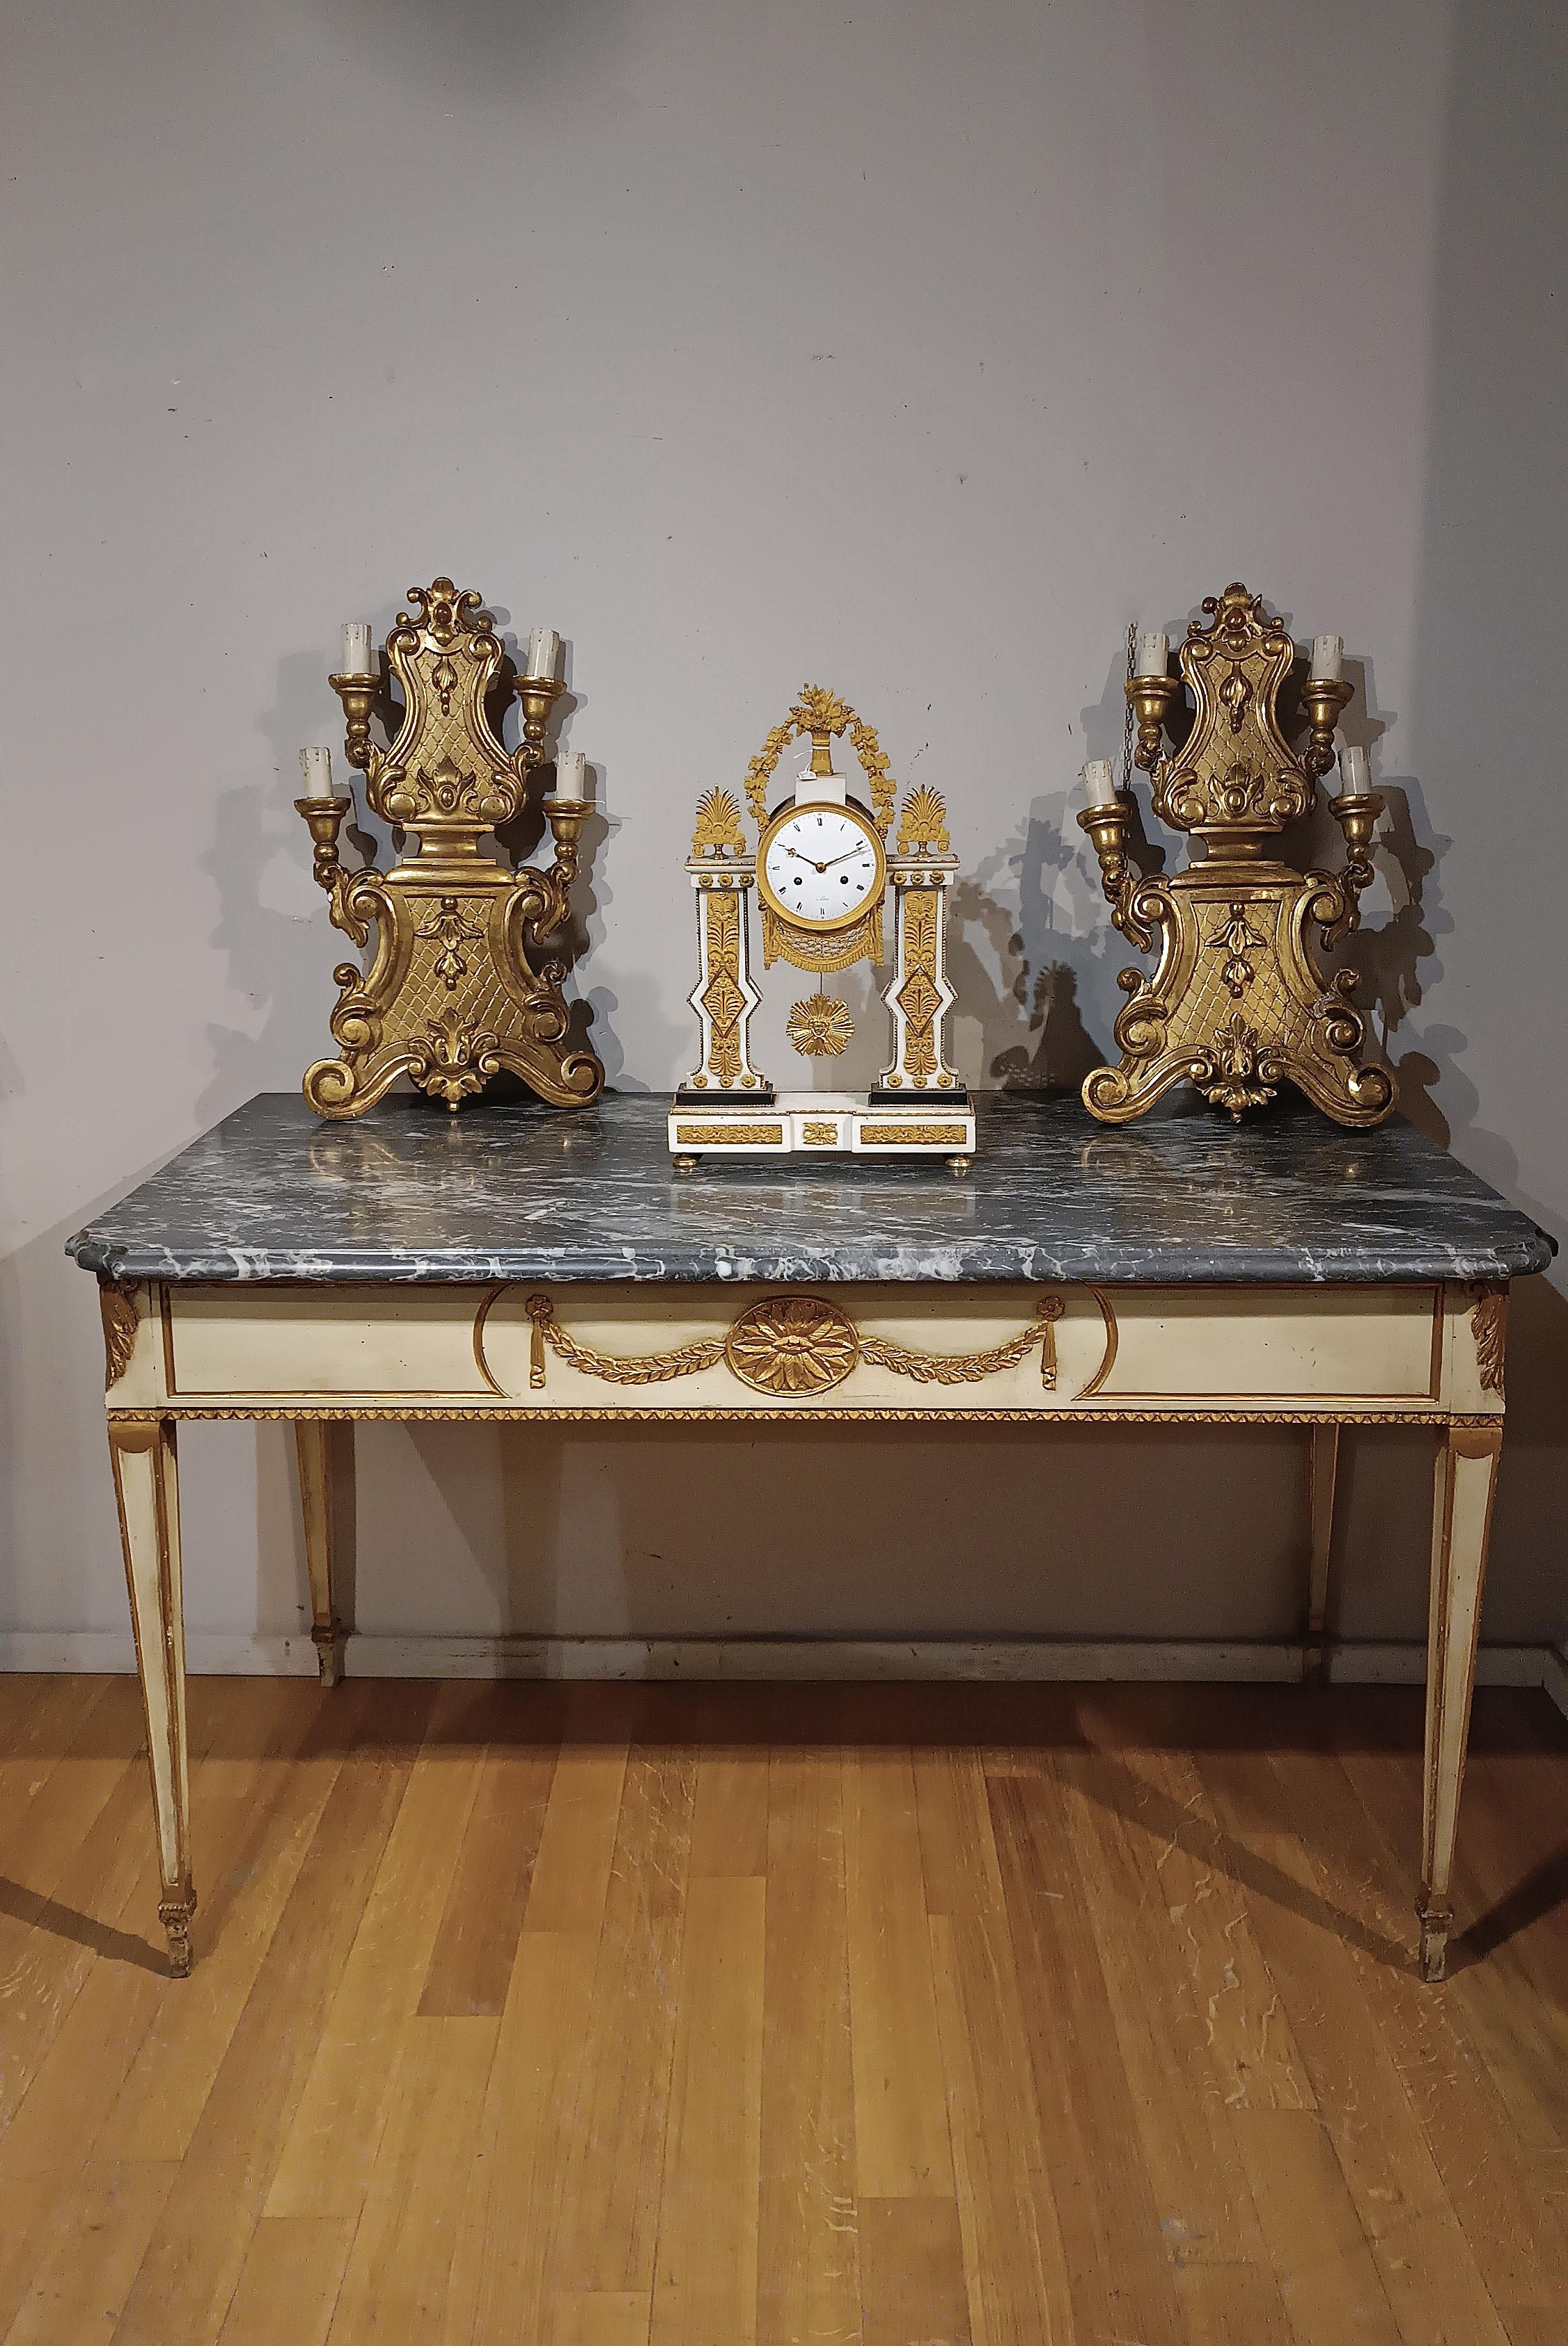 END OF THE 18th CENTURY NEOCLASSICAL CONSOLLE WITH GRAY BARDIGLIO MARBLE For Sale 2